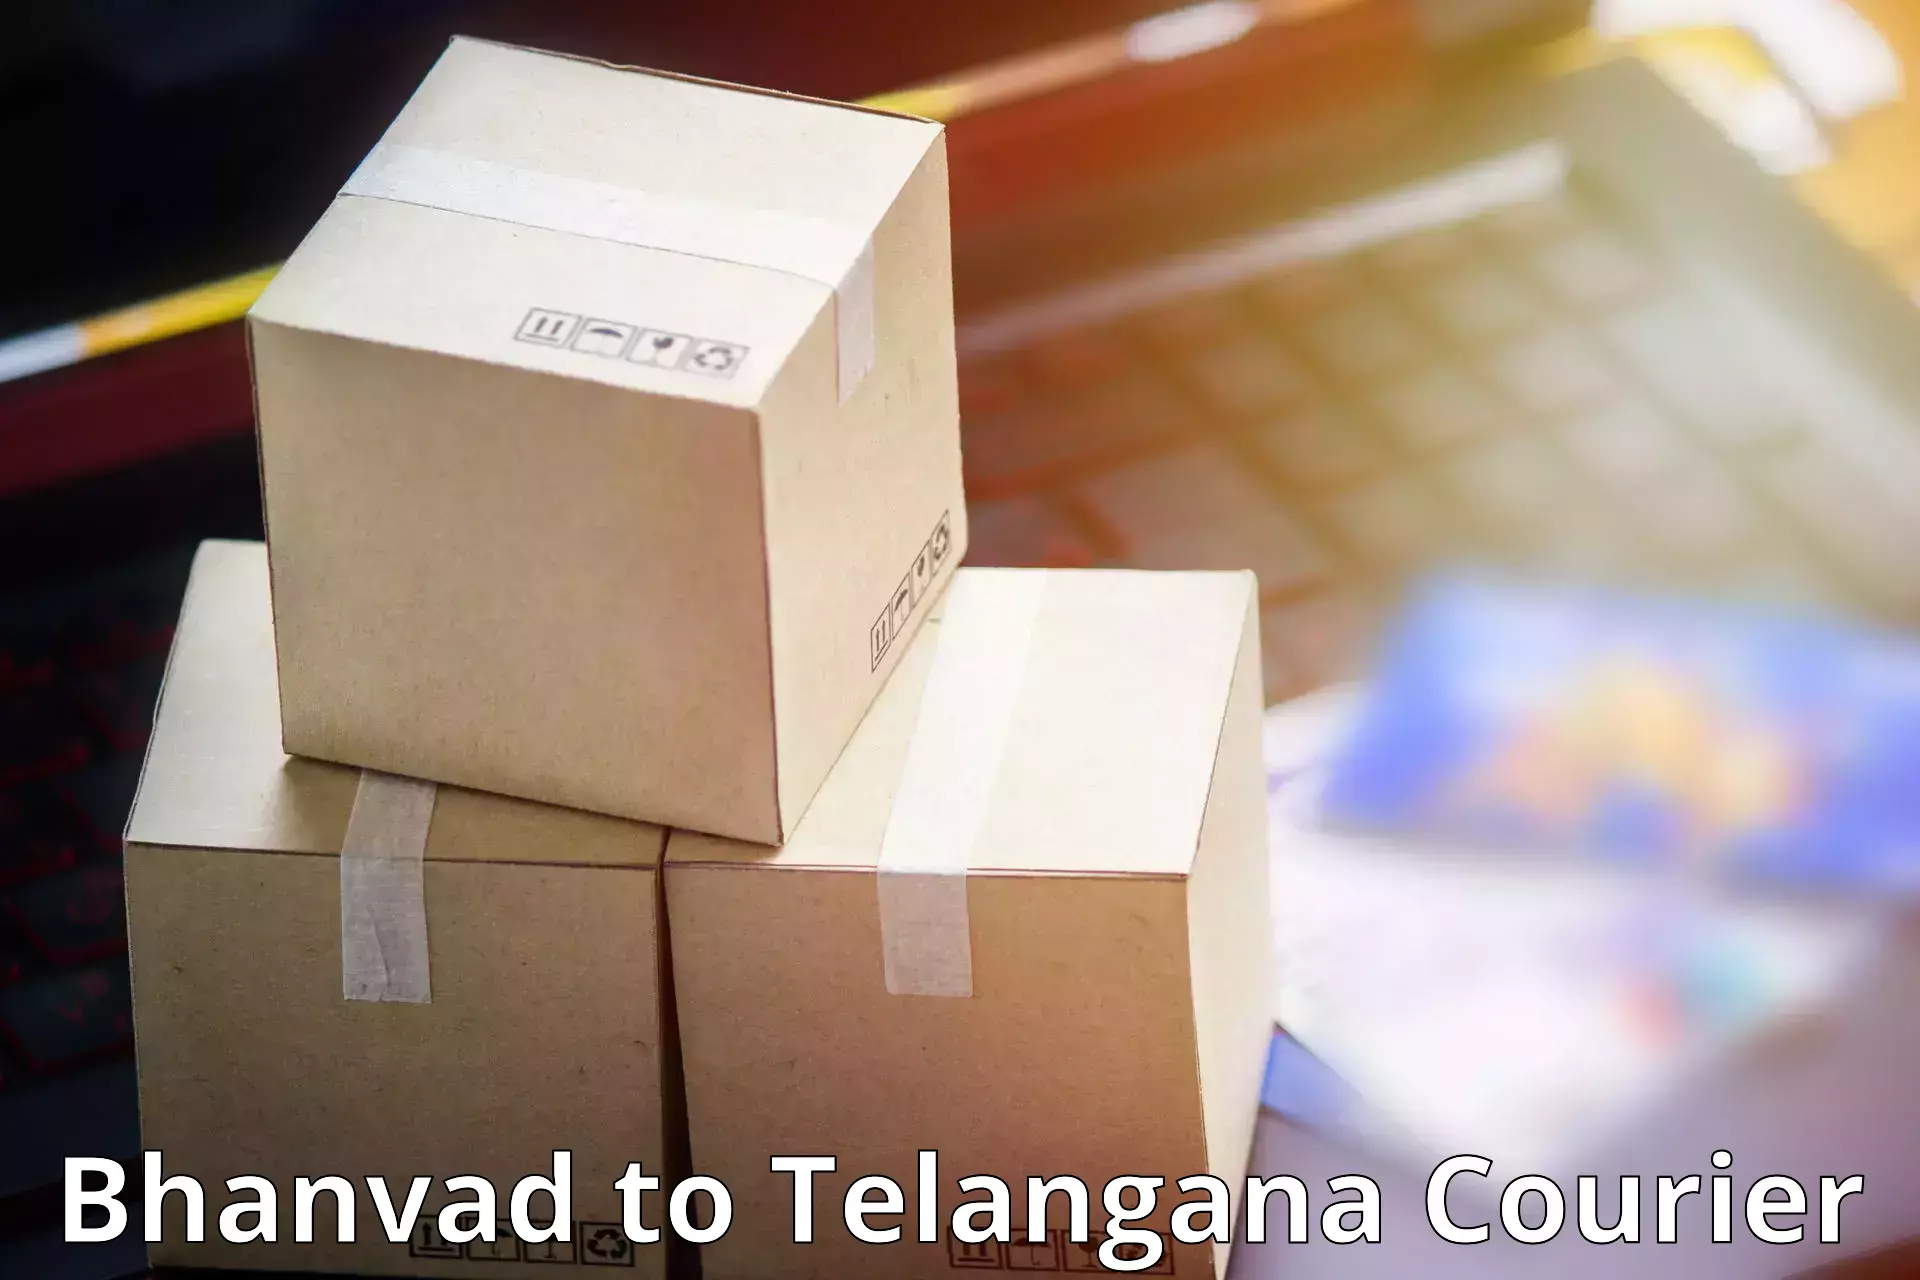 Efficient freight service Bhanvad to Khairatabad